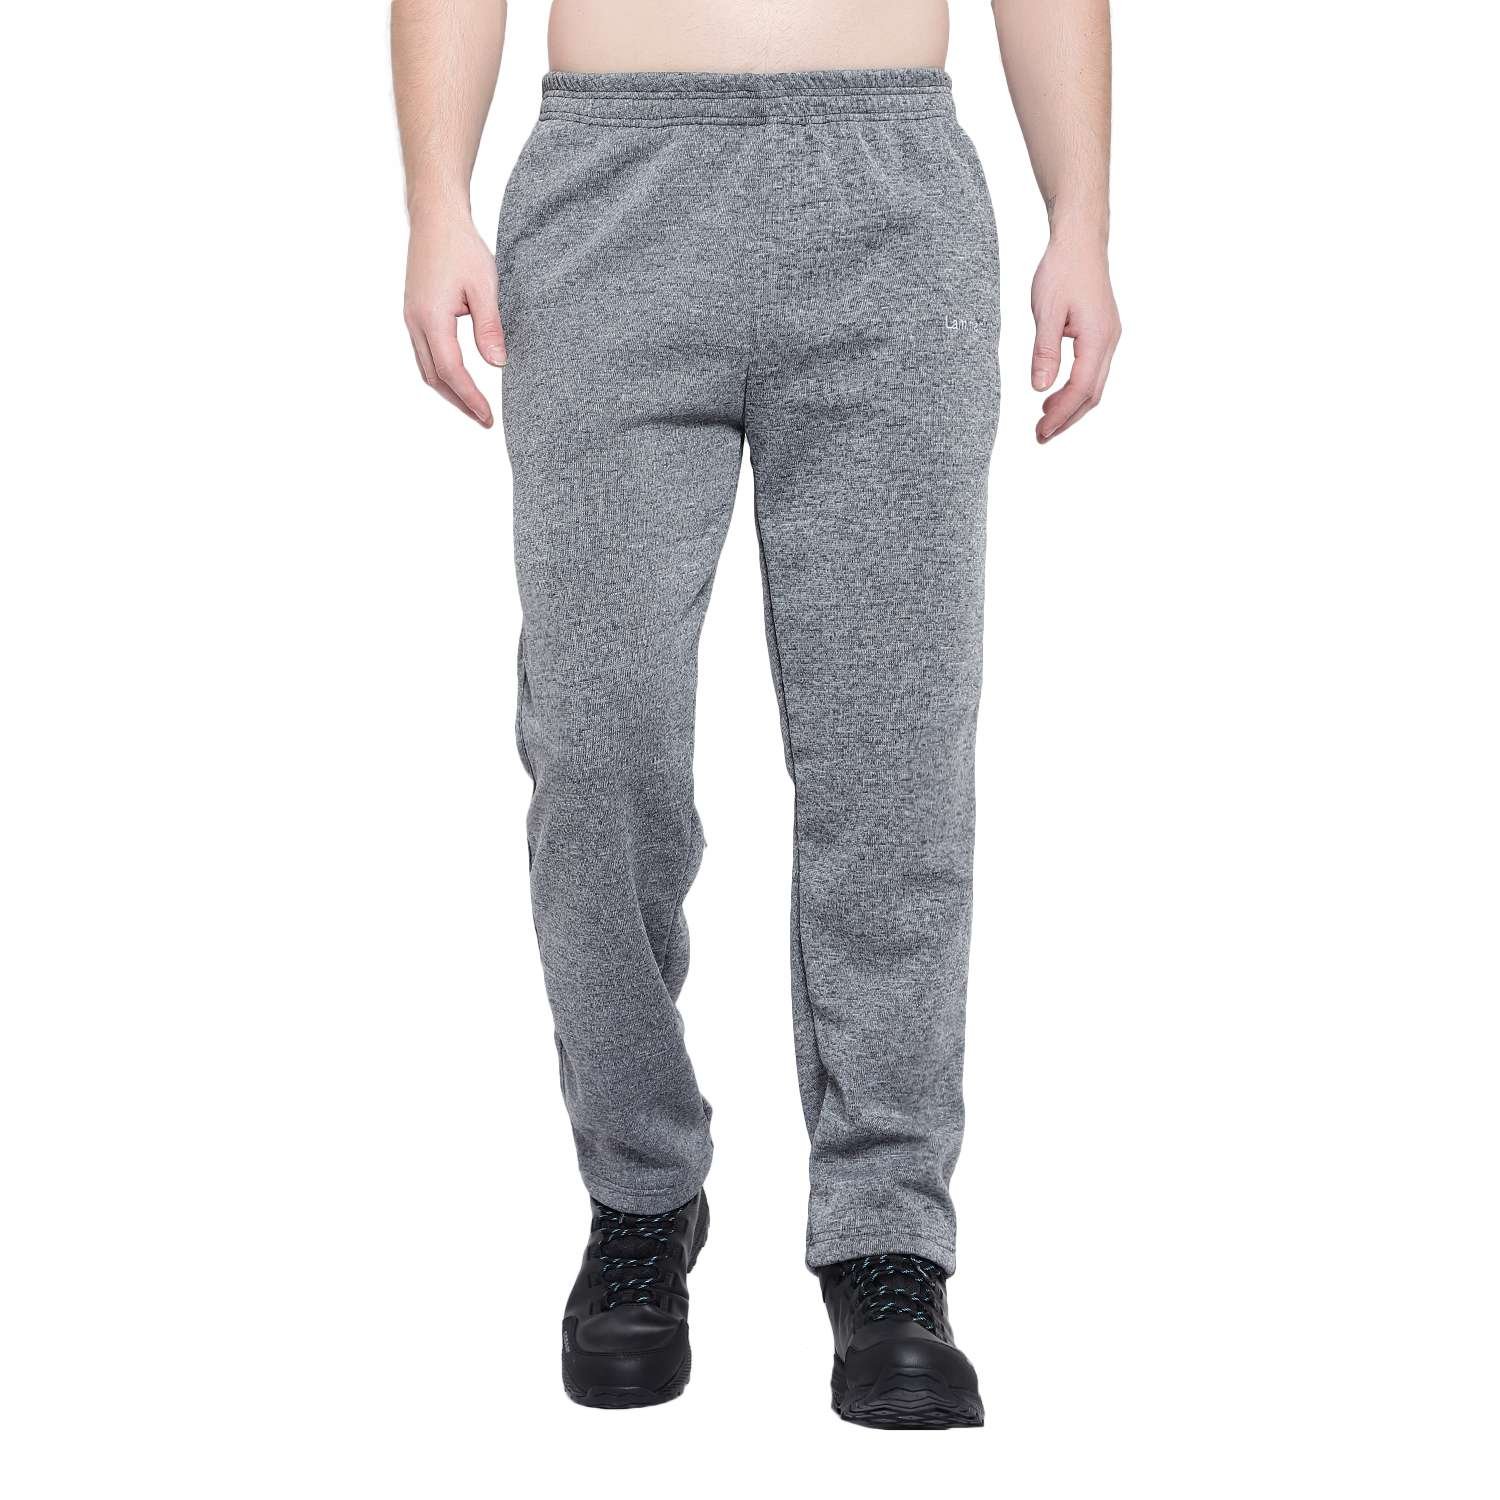 regular wear Mens Lower Pant at Rs.499/Piece in nagpur offer by Shree Hari  shoppe